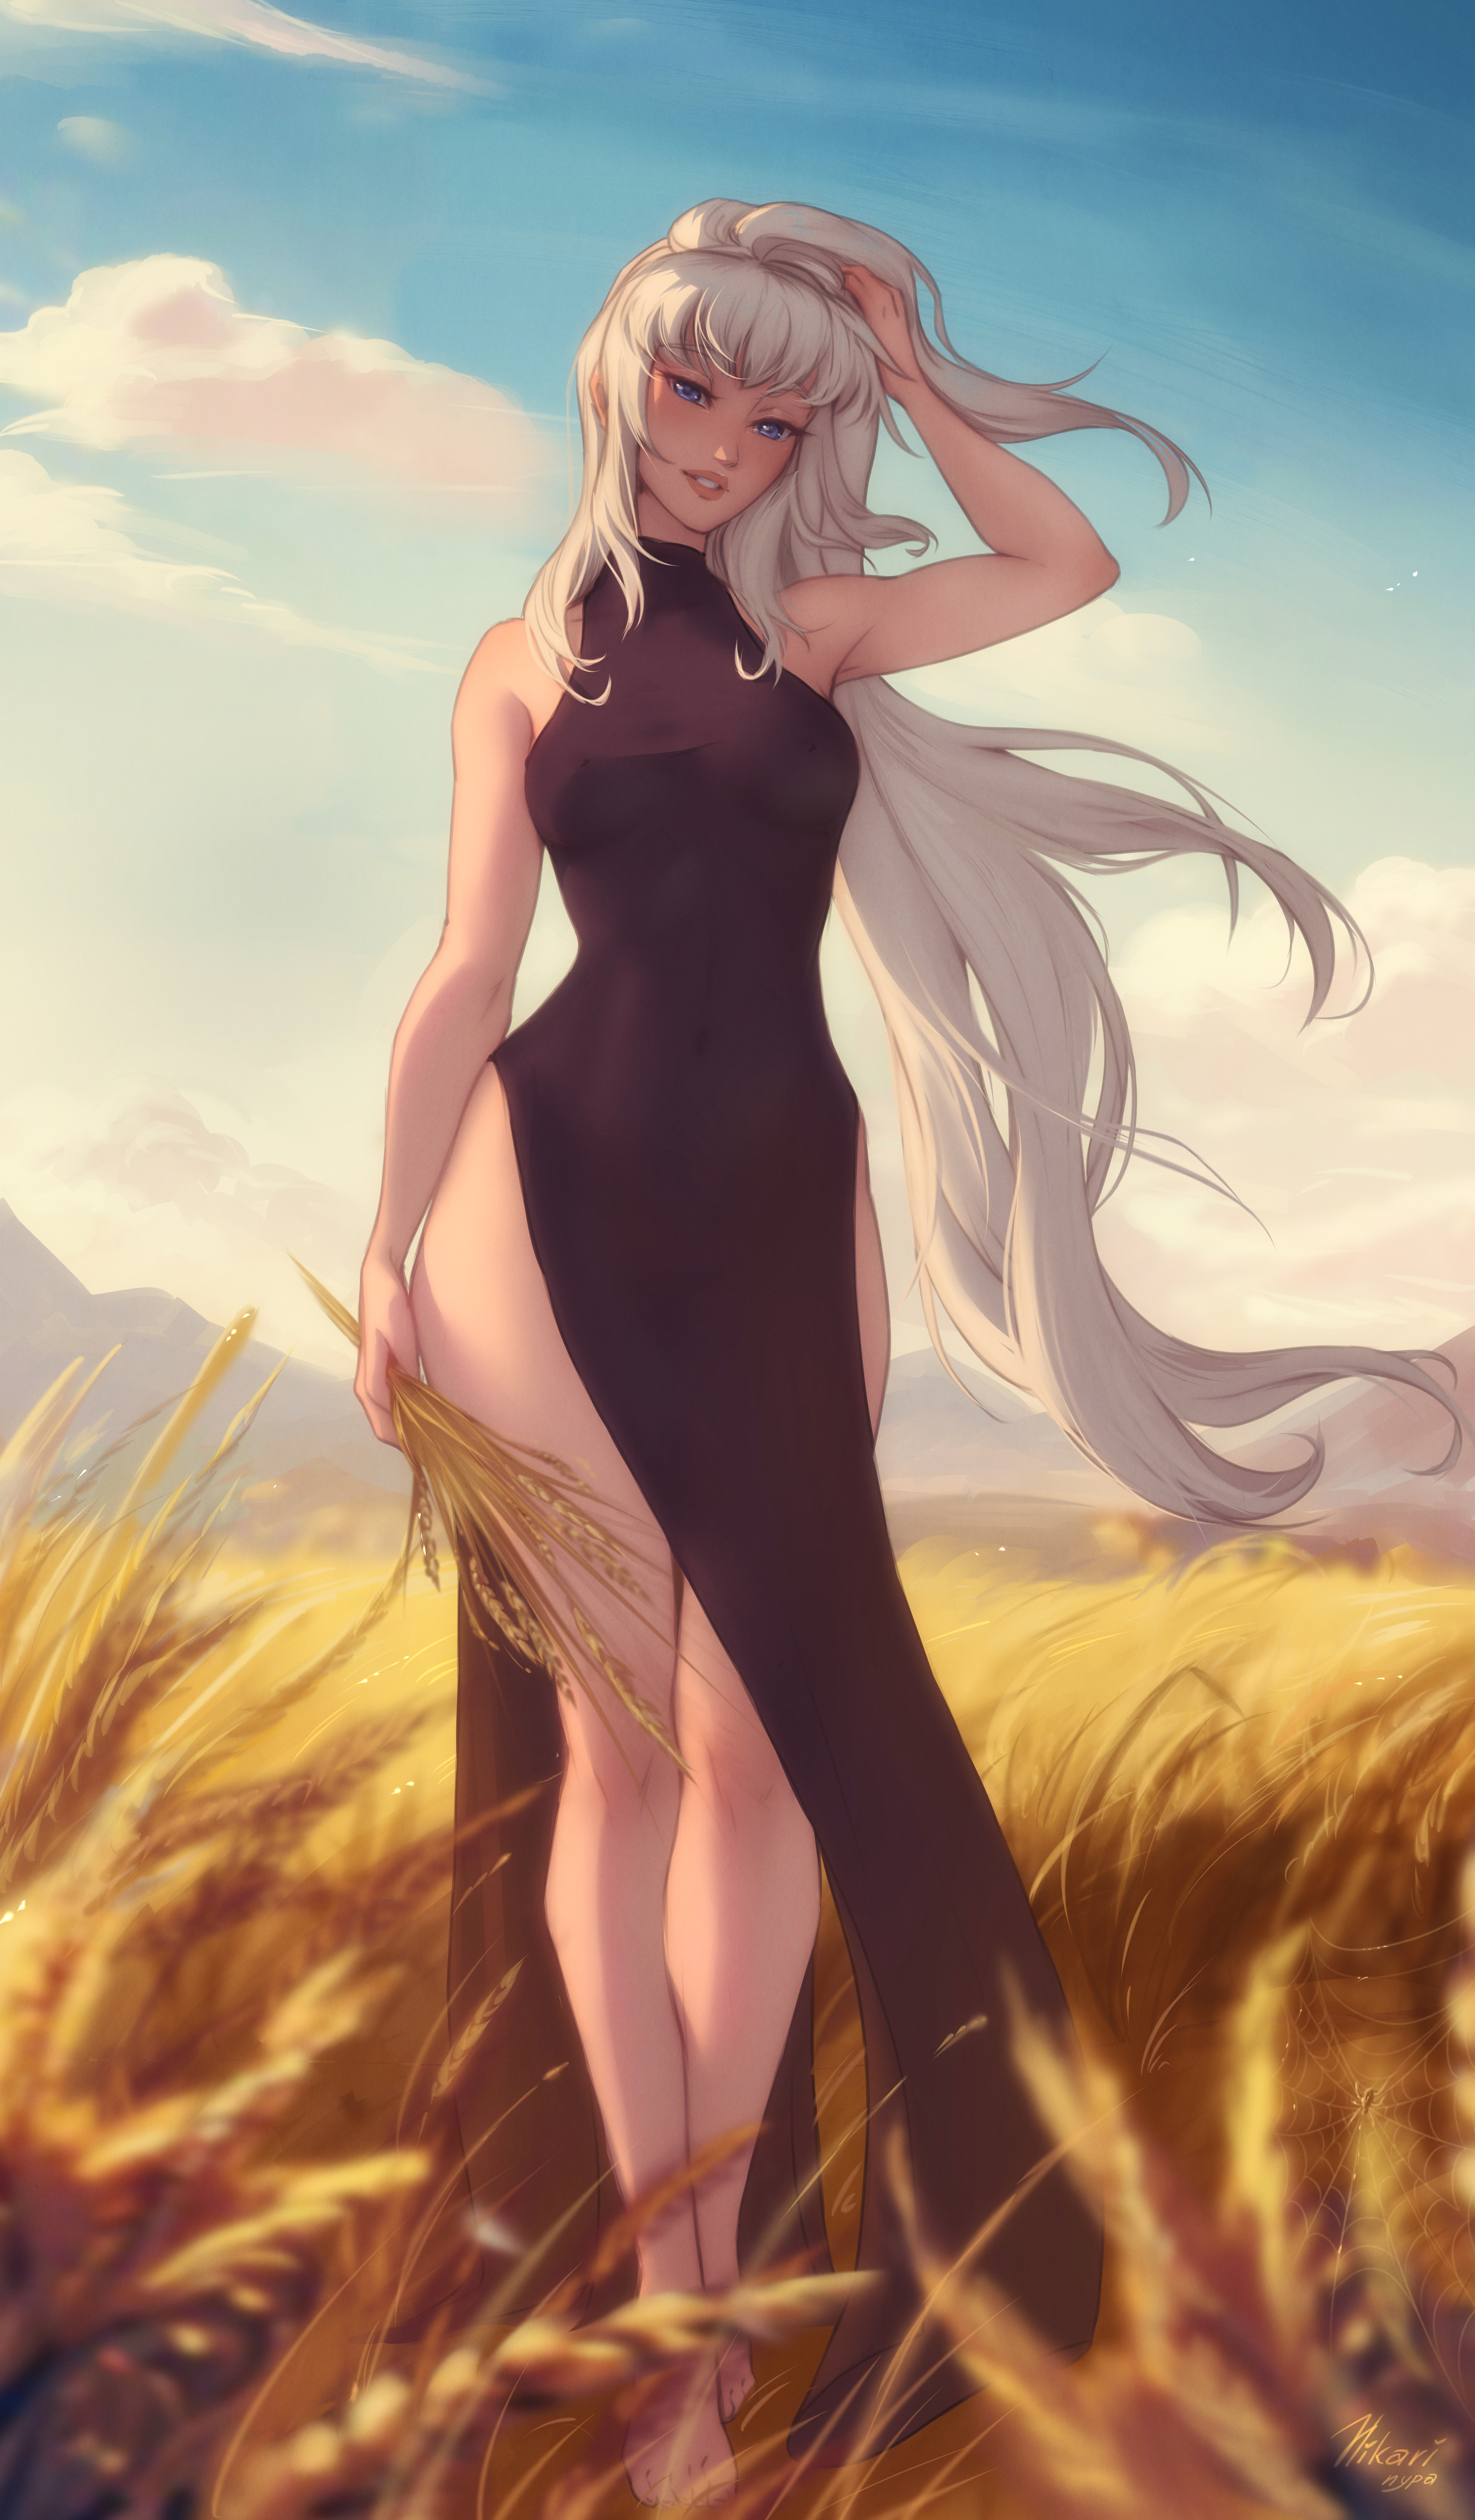 General 4096x7000 women long hair wheat field sky artwork drawing original characters Personal ami portrait display digital art frontal view thighs together barefoot knees together standing legs together hands in hair hair blowing in the wind